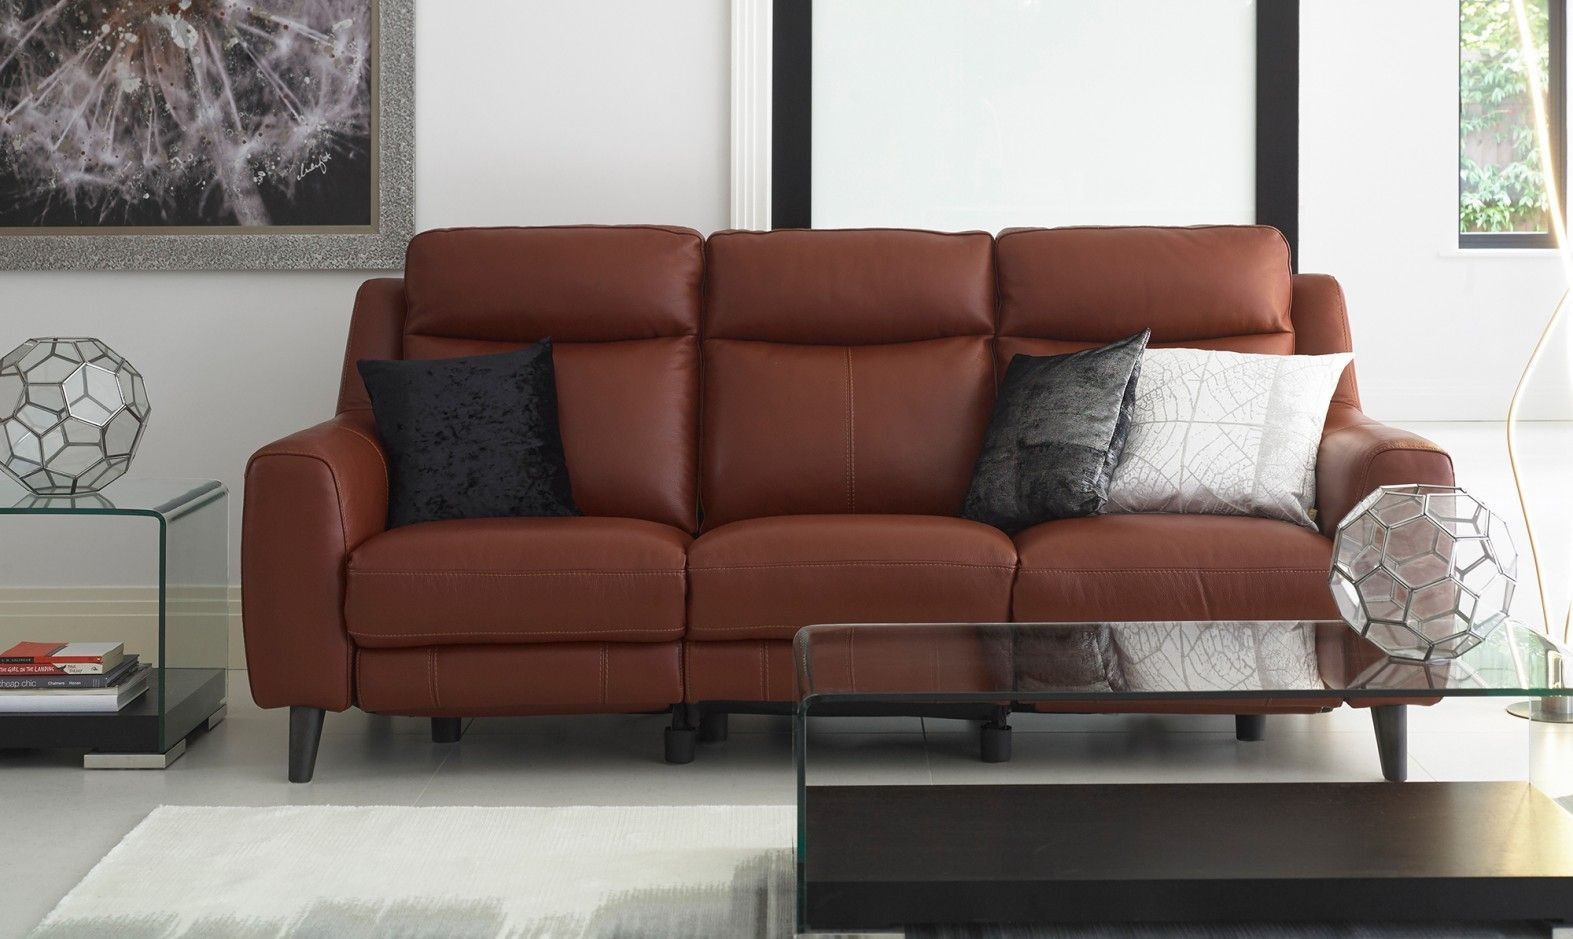 Recliner Sofas In Leather & Fabric | Fishpools With Regard To Recliner Sofas (View 7 of 10)